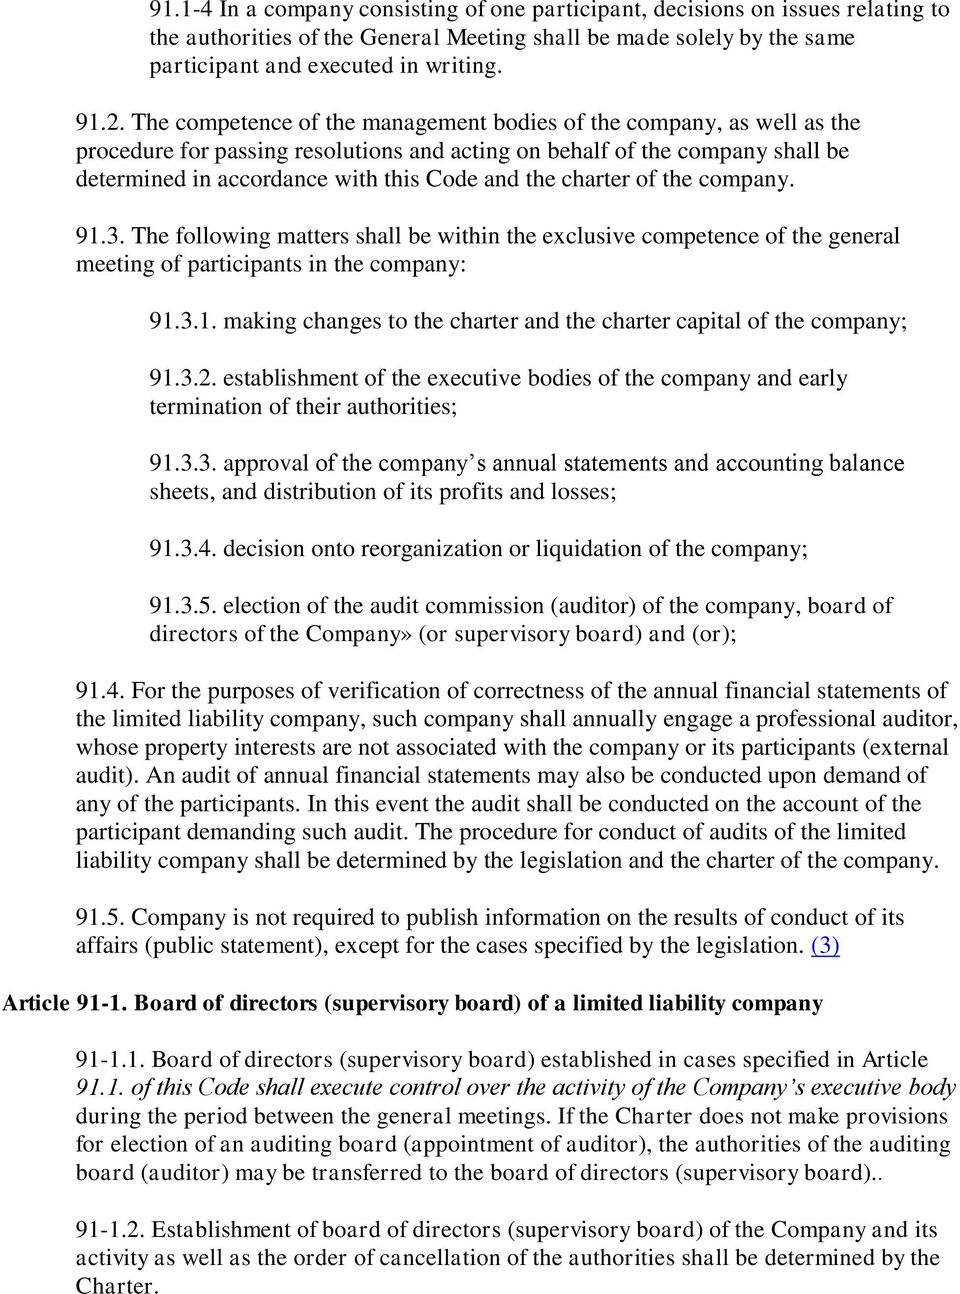 charter of the company. 91.3. The following matters shall be within the exclusive competence of the general meeting of participants in the company: 91.3.1. making changes to the charter and the charter capital of the company; 91.